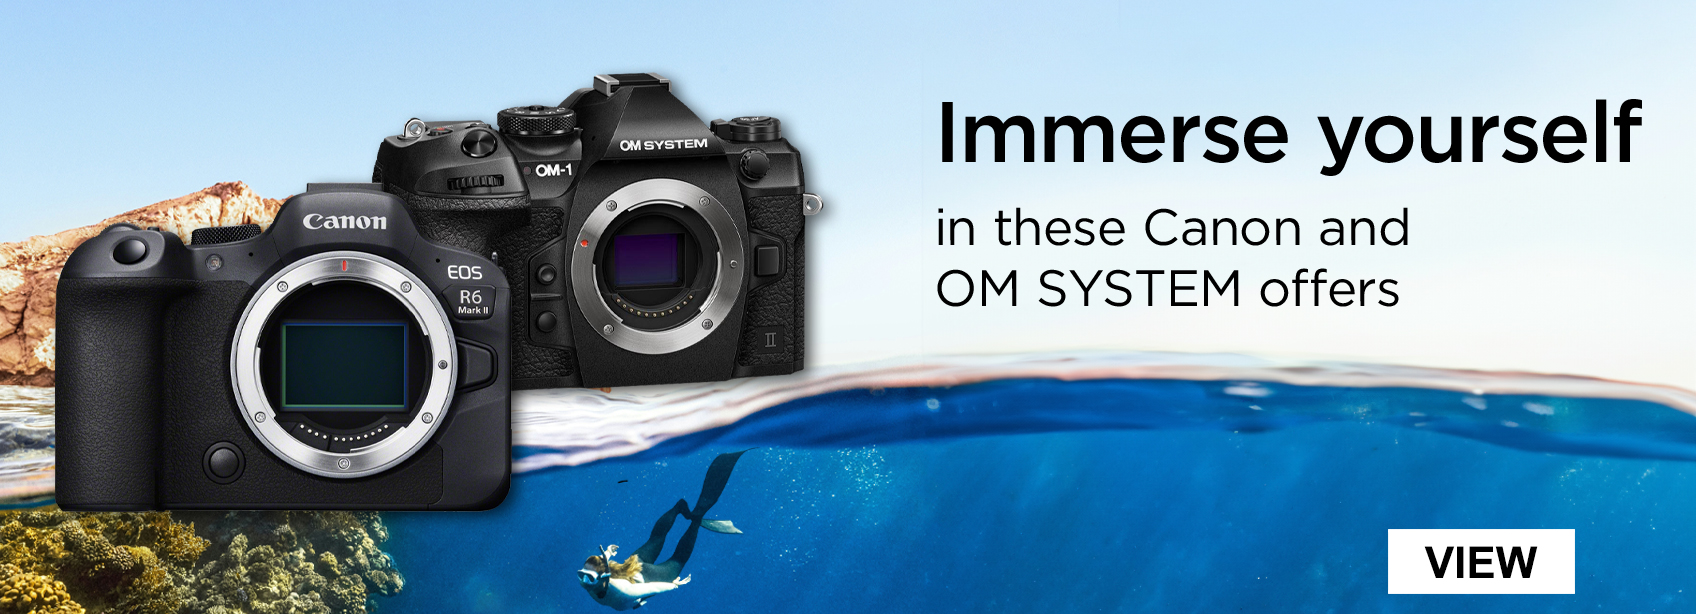 Immerse yourself in these Canon and OM SYSTEM offers